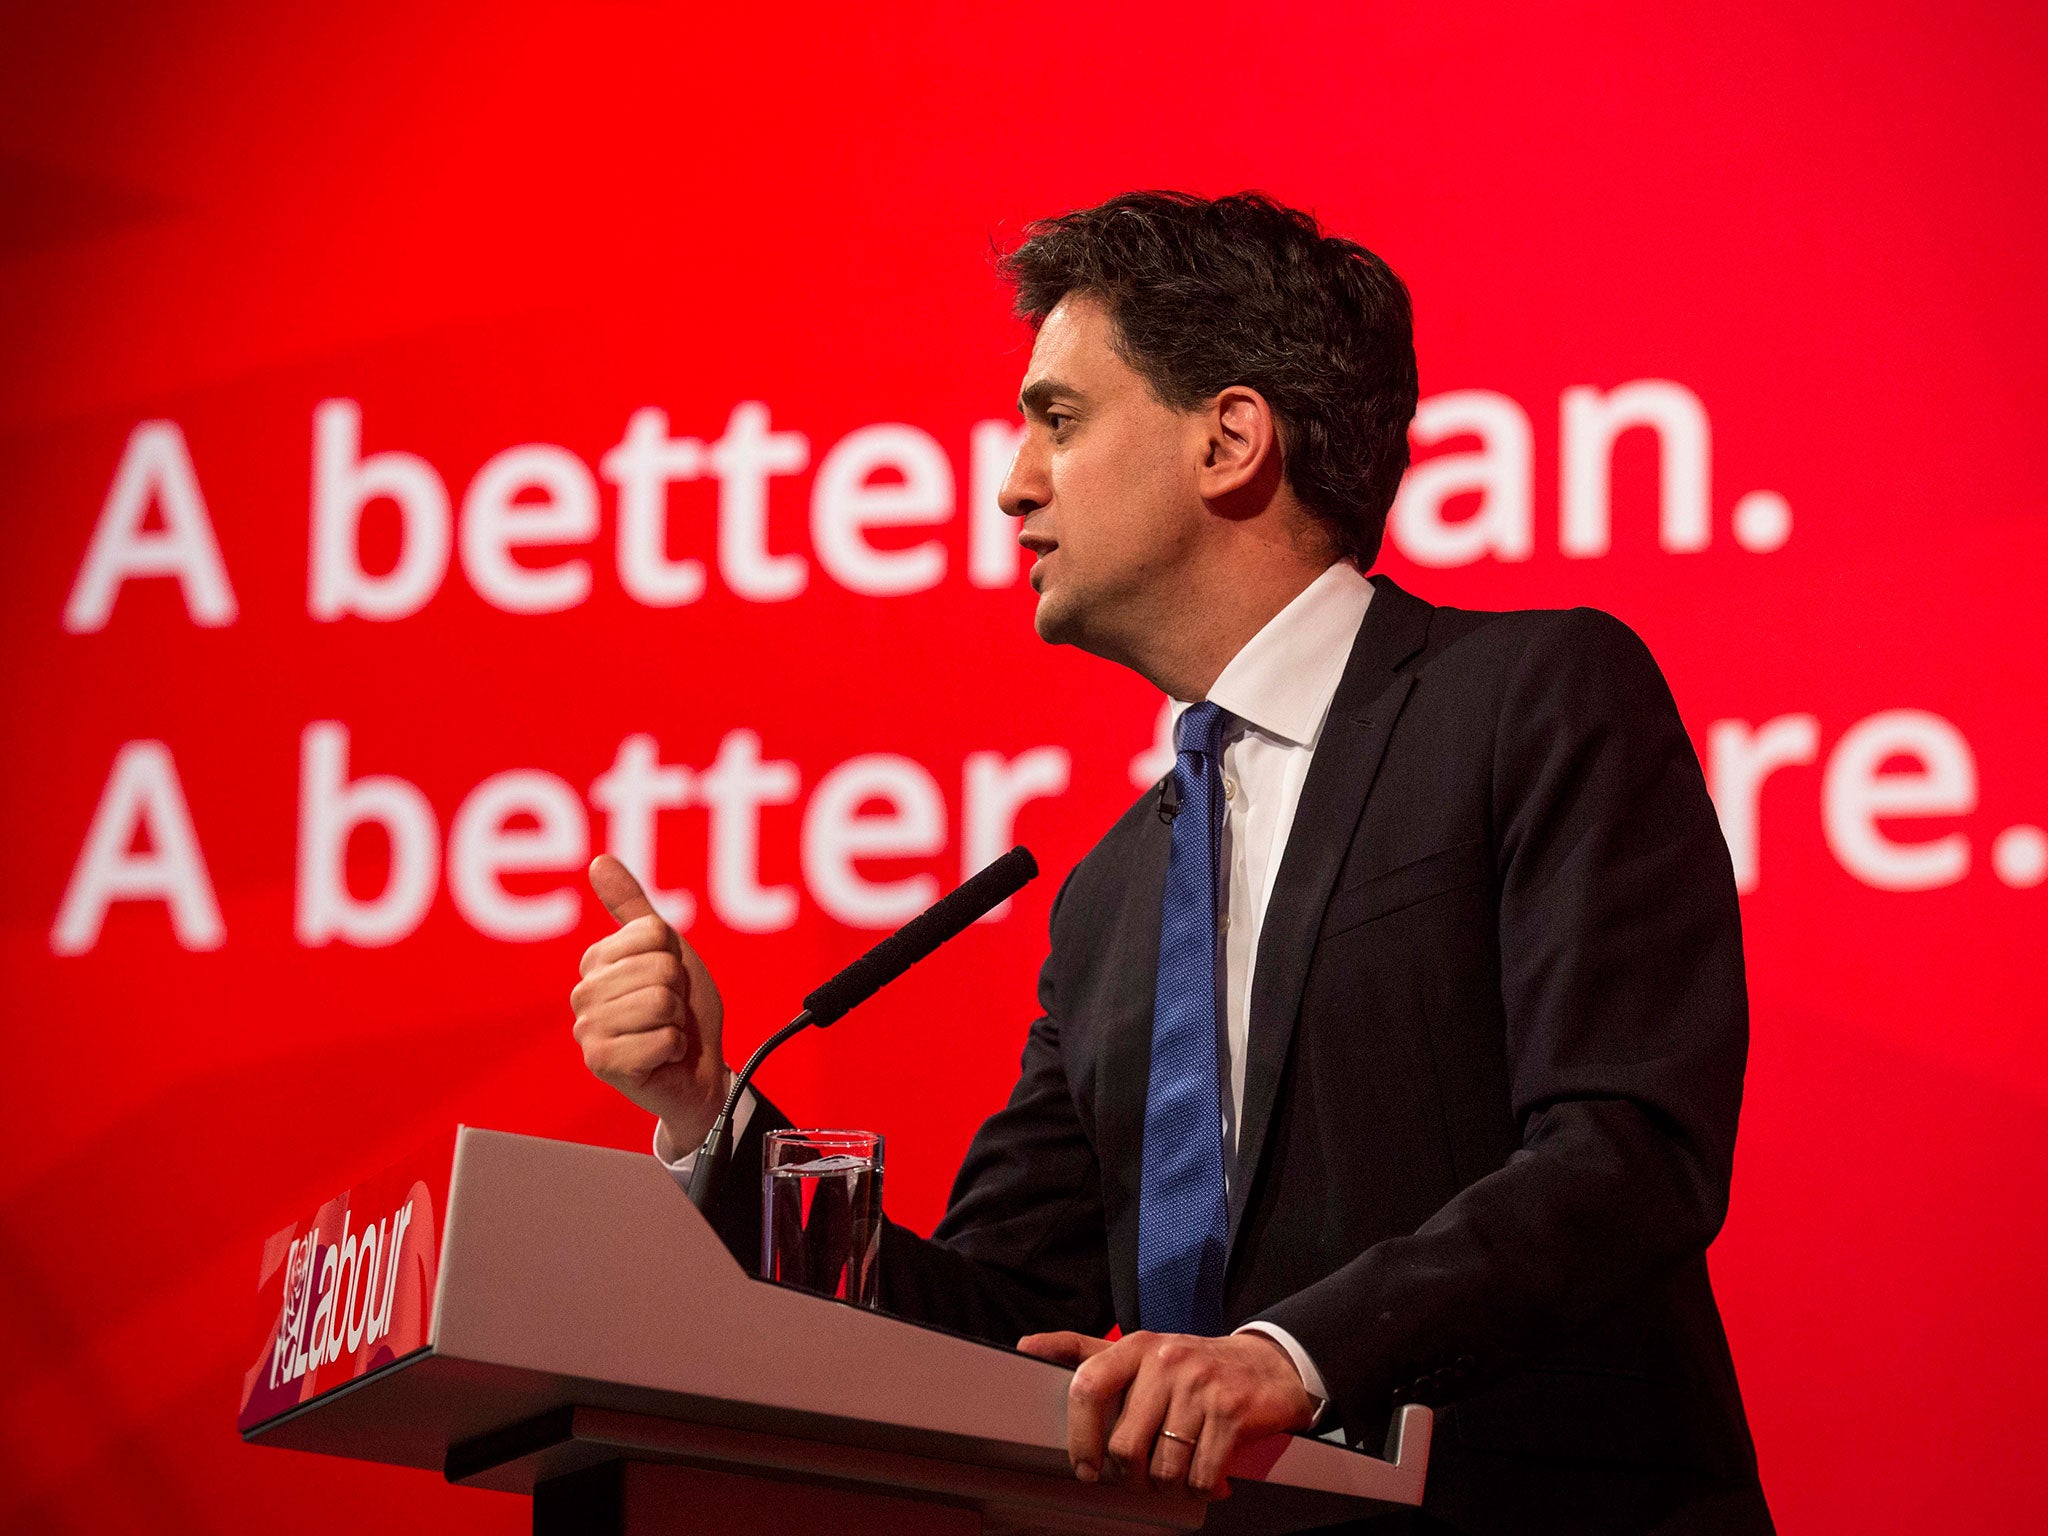 'It is simply too expensive for so many young people to buy a home today' Miliband will say